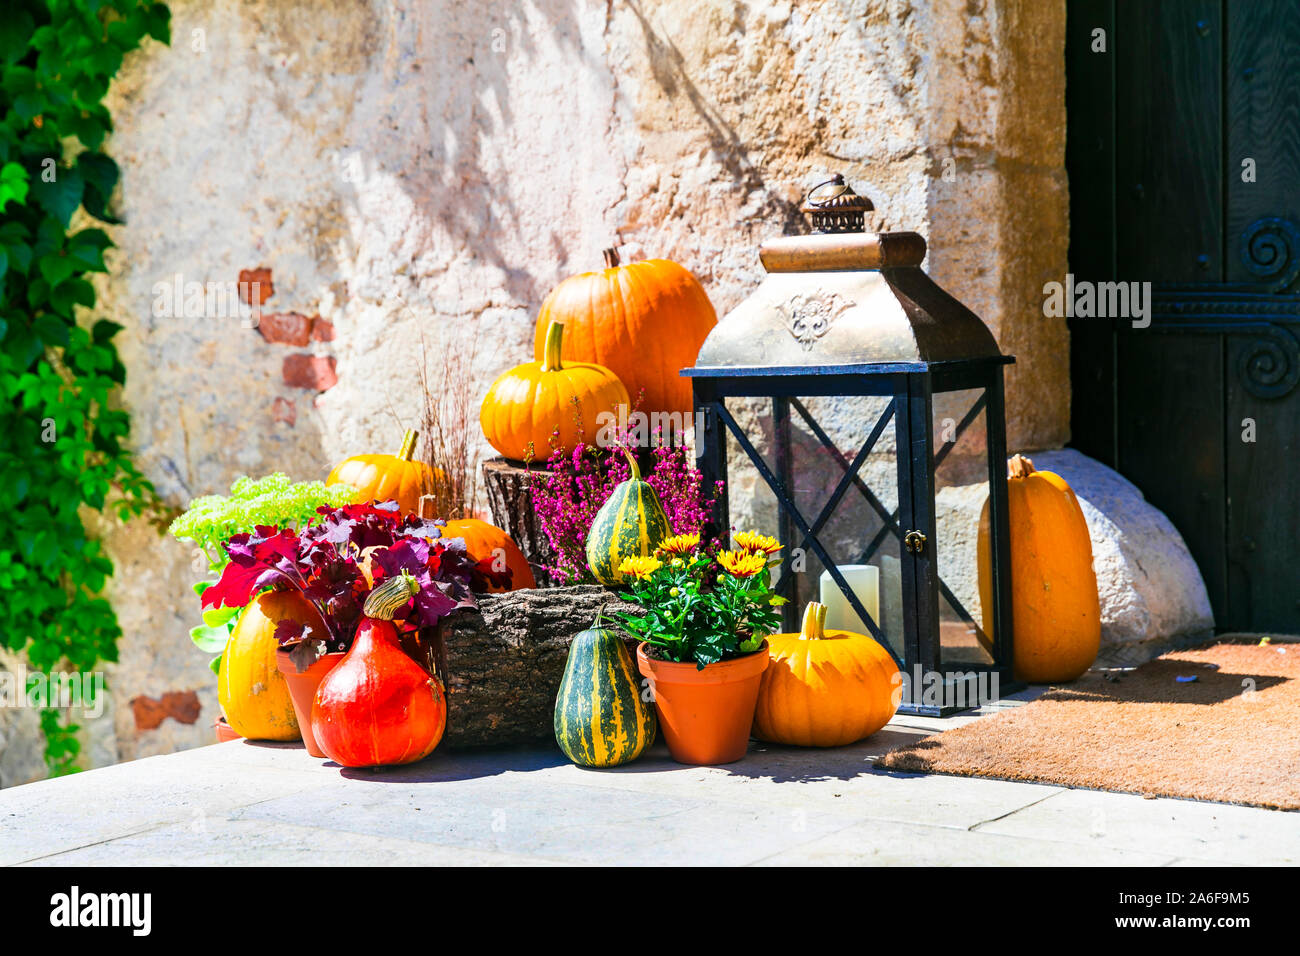 autumn still life and street decoration with pumpkins Stock Photo